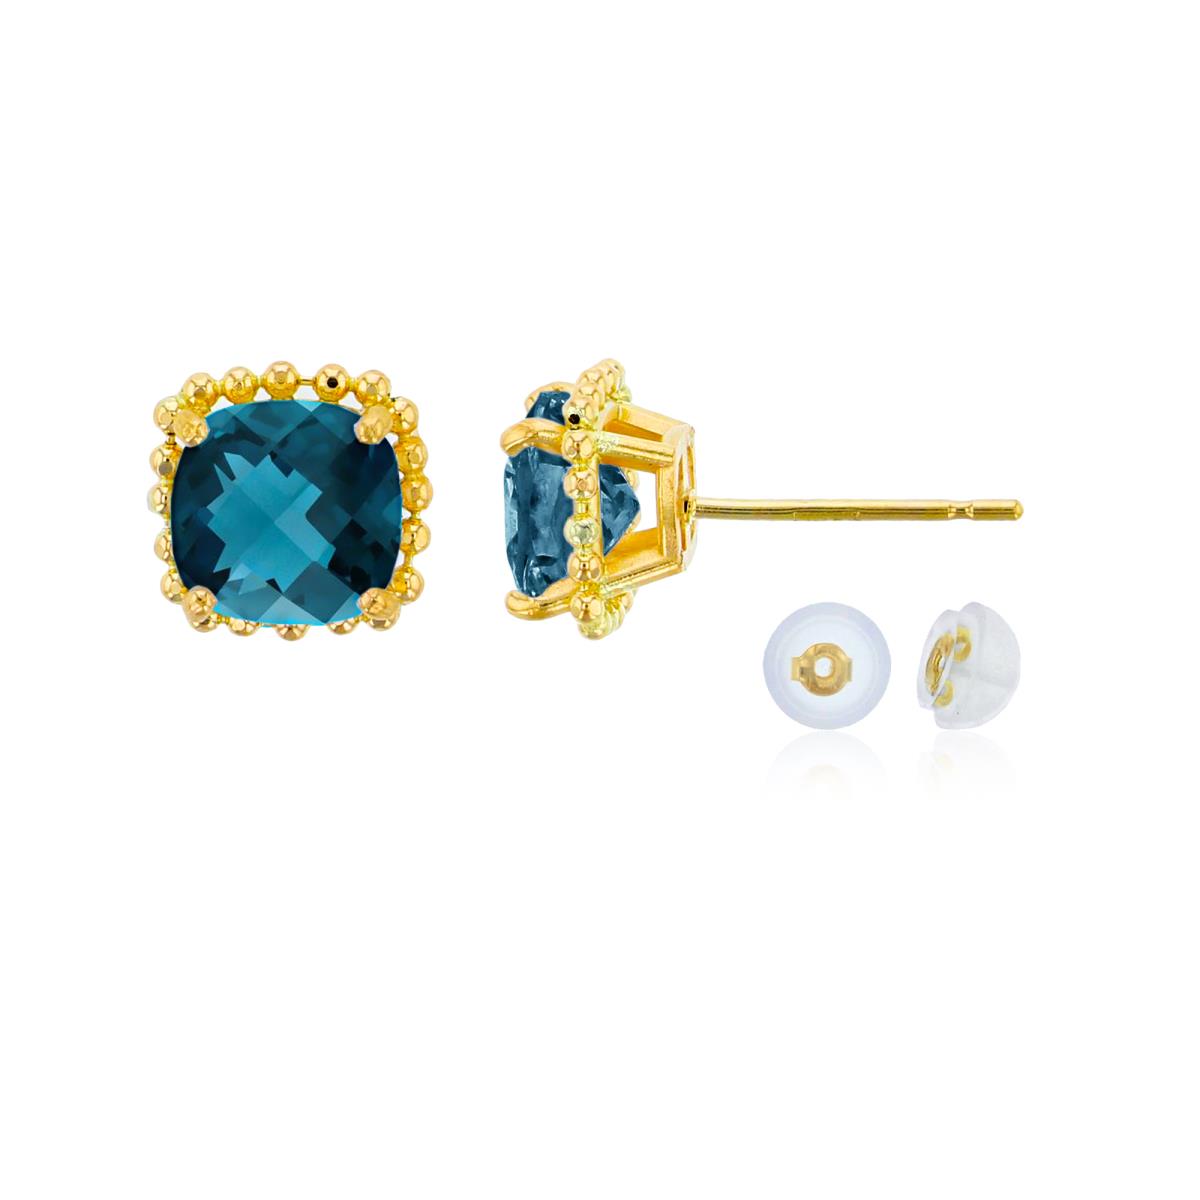 10K Yellow Gold 6x6mm Cushion Cut London Blue Topaz Bead Frame Stud Earring with Silicone Back